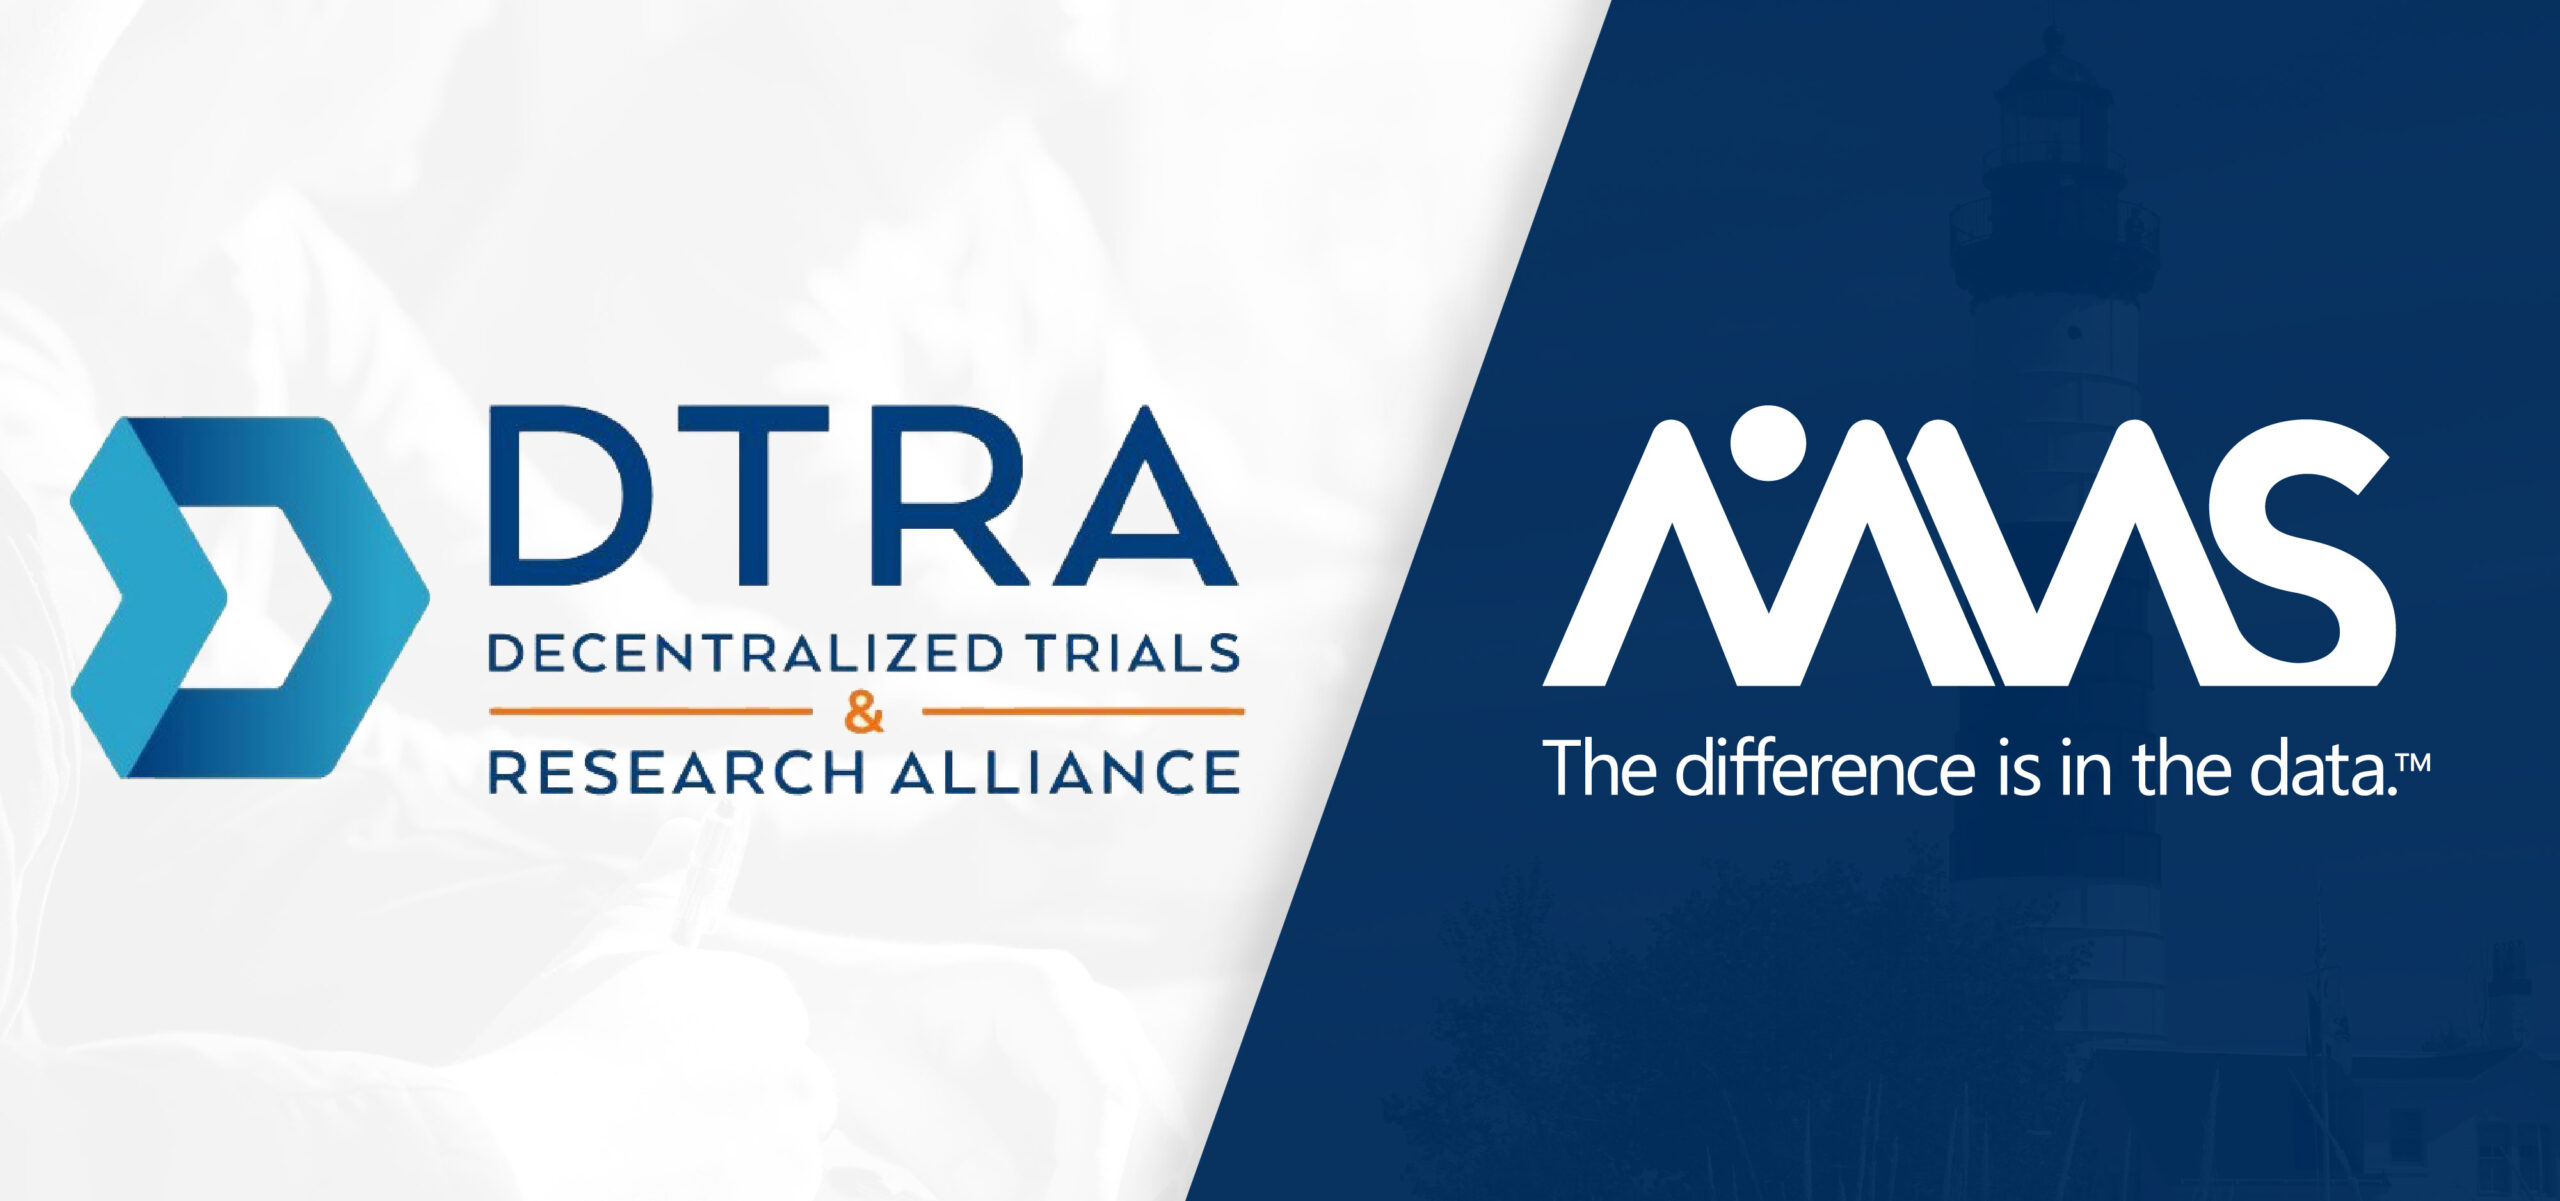 DTRA decentralized trial and research alliance virtual clinical trials pfizer astrazeneca eisai amazon withings accenture amgen astellas avanir biogen BMS csl behring janssen medrio oracle mms holdings roche takeda FDA others